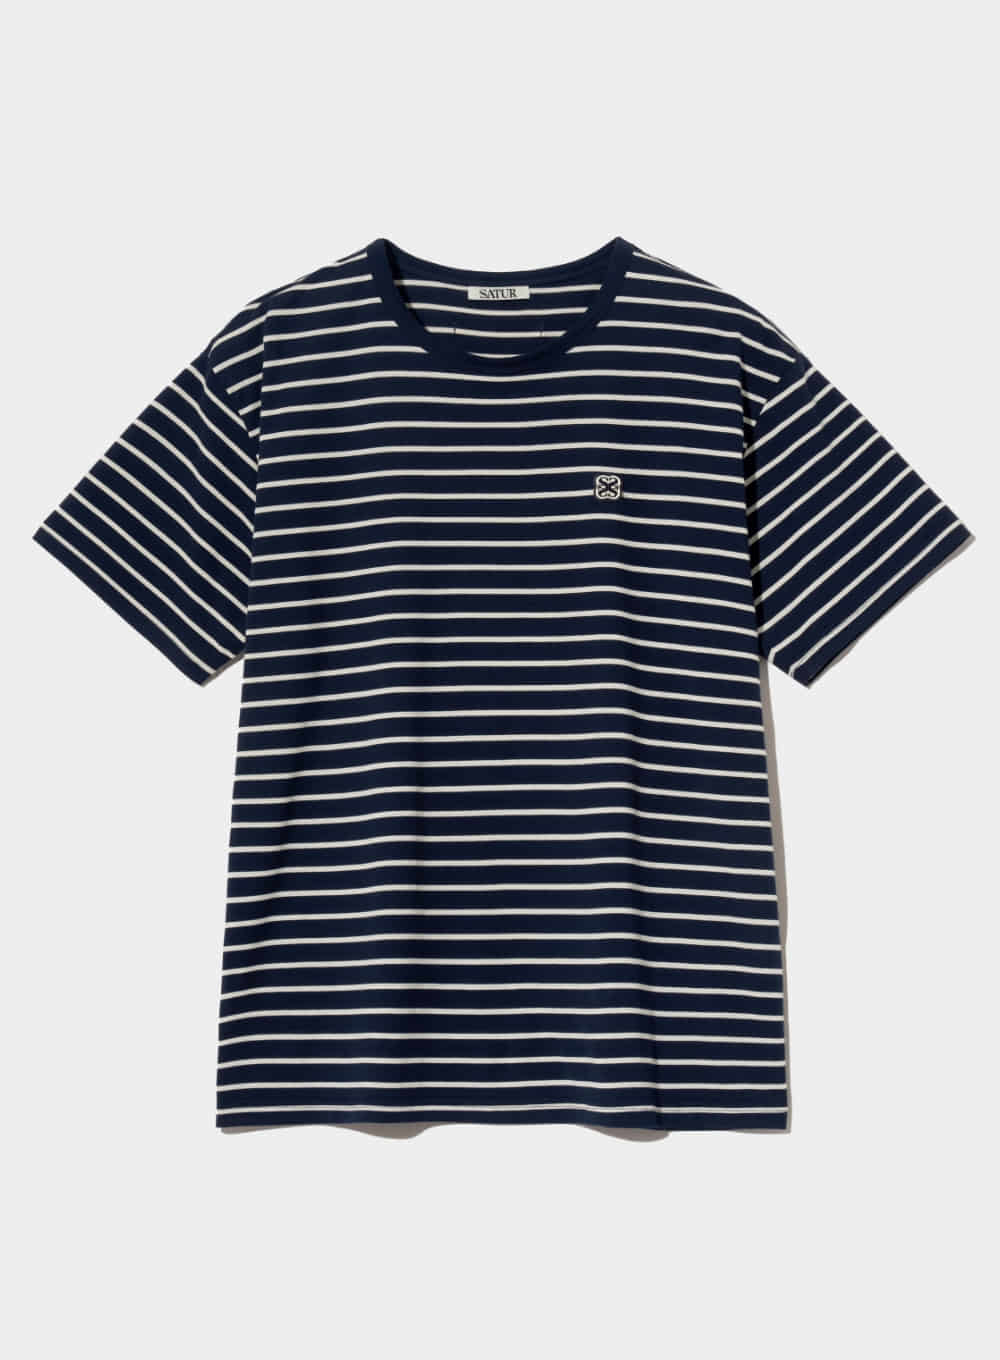 All Day Cotton Stripe T-Shirt - Classic Navy